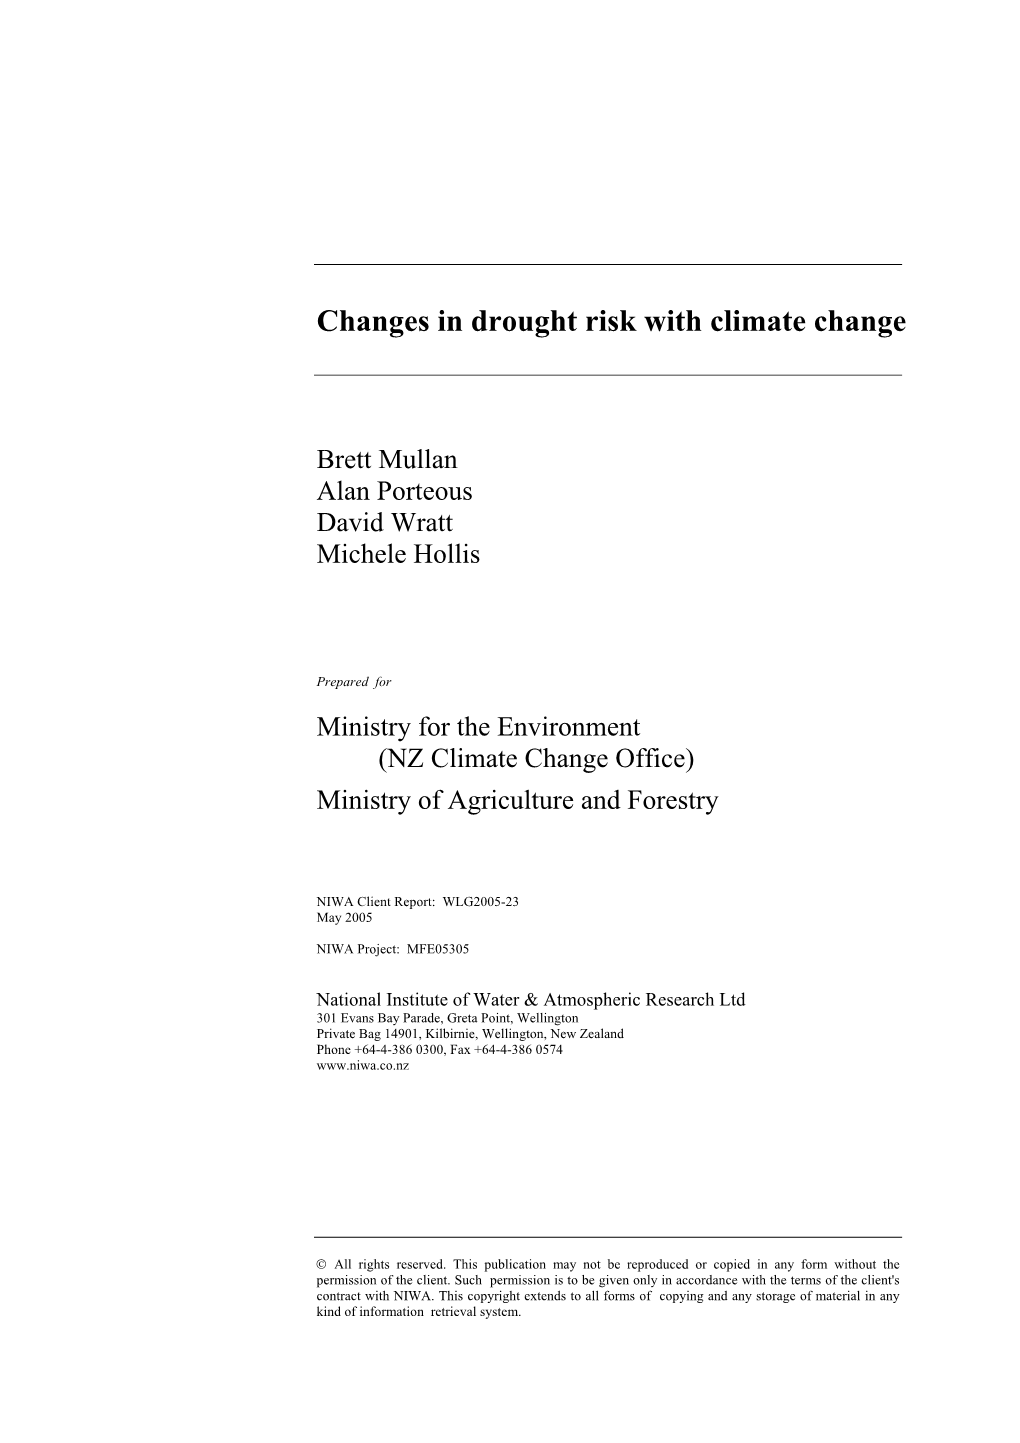 Changes in Drought Risk with Climate Change